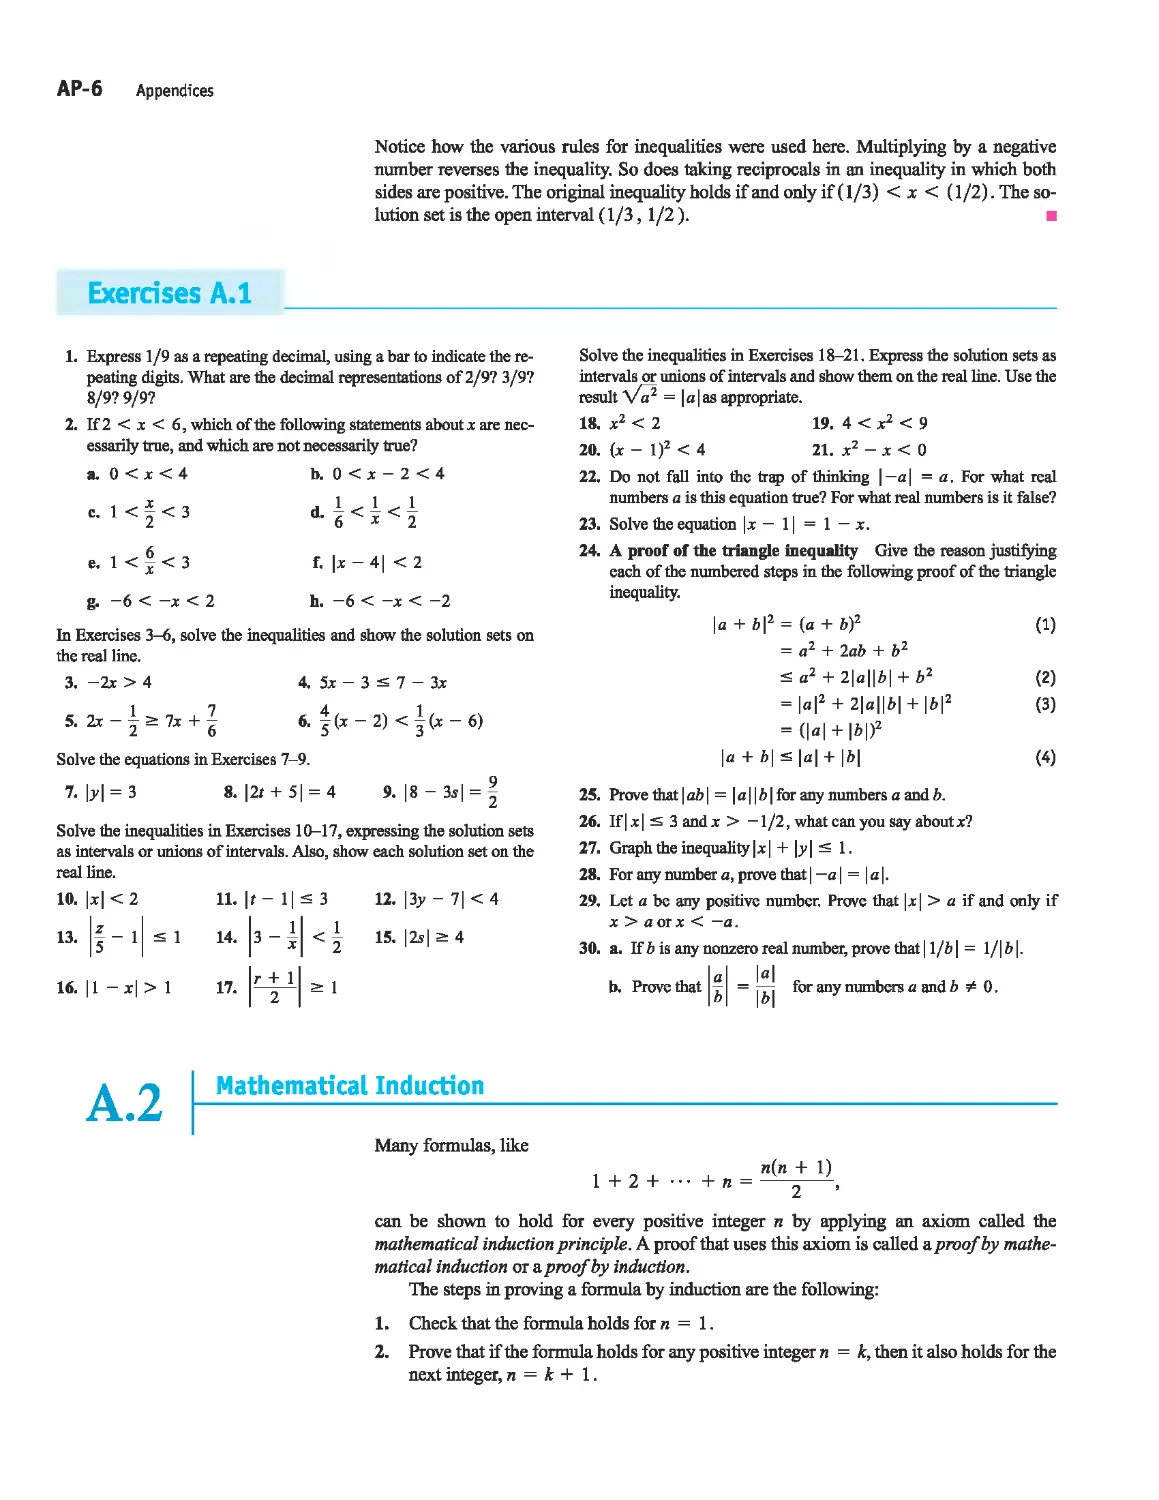 A.2 - Mathematical Induction